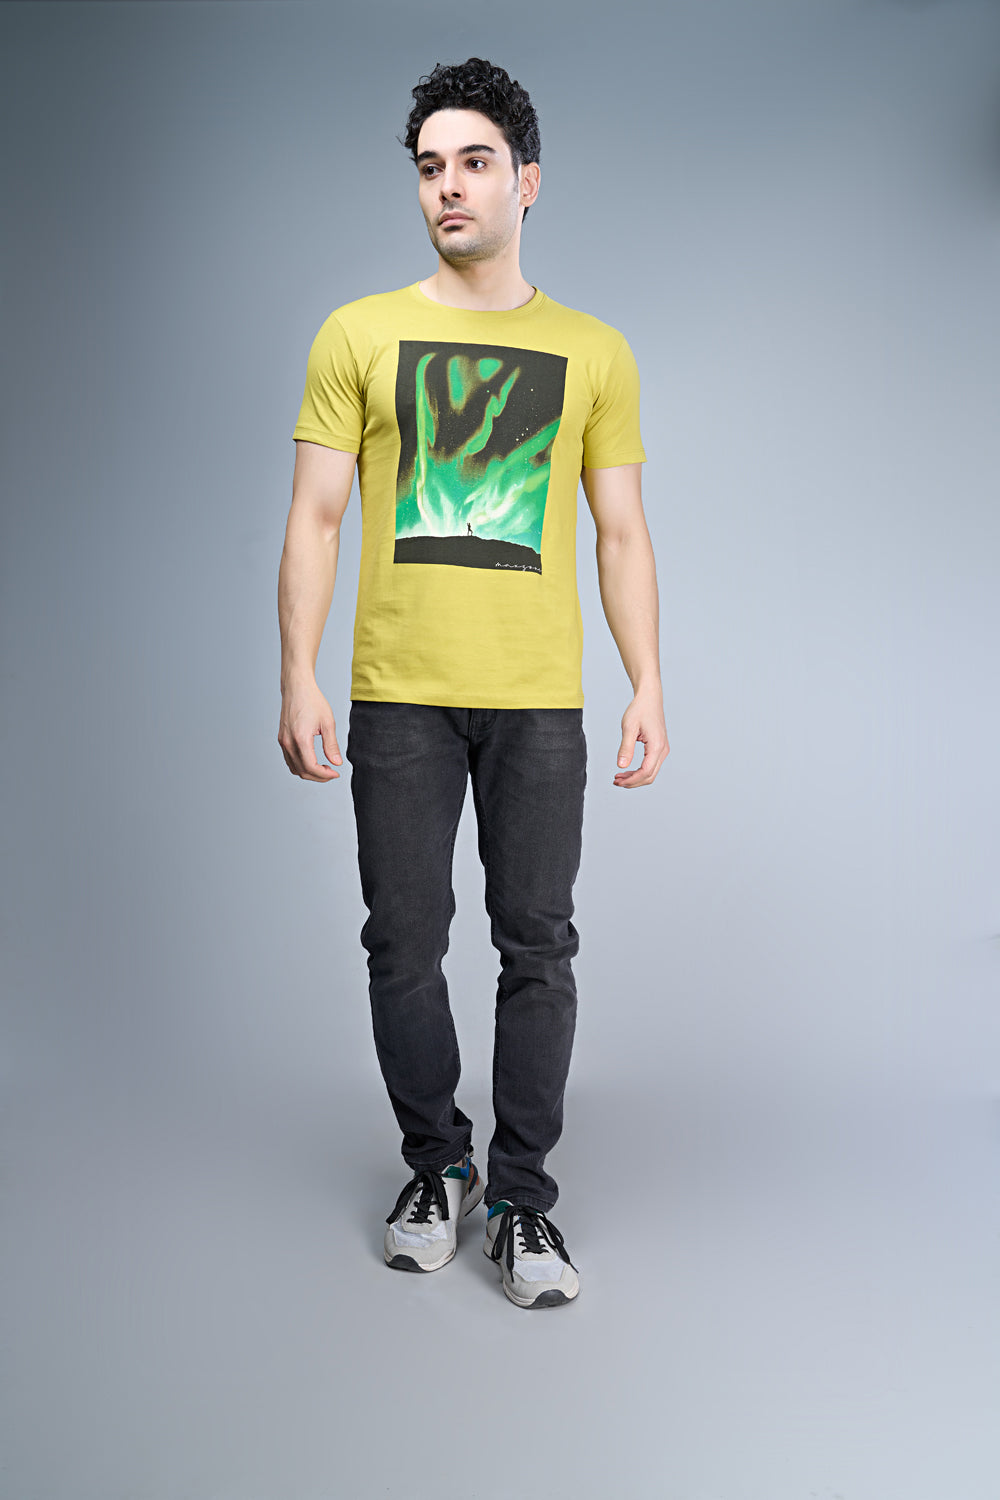 B. Yellow colored, cotton Graphic T shirt for men, half sleeves and round neck.